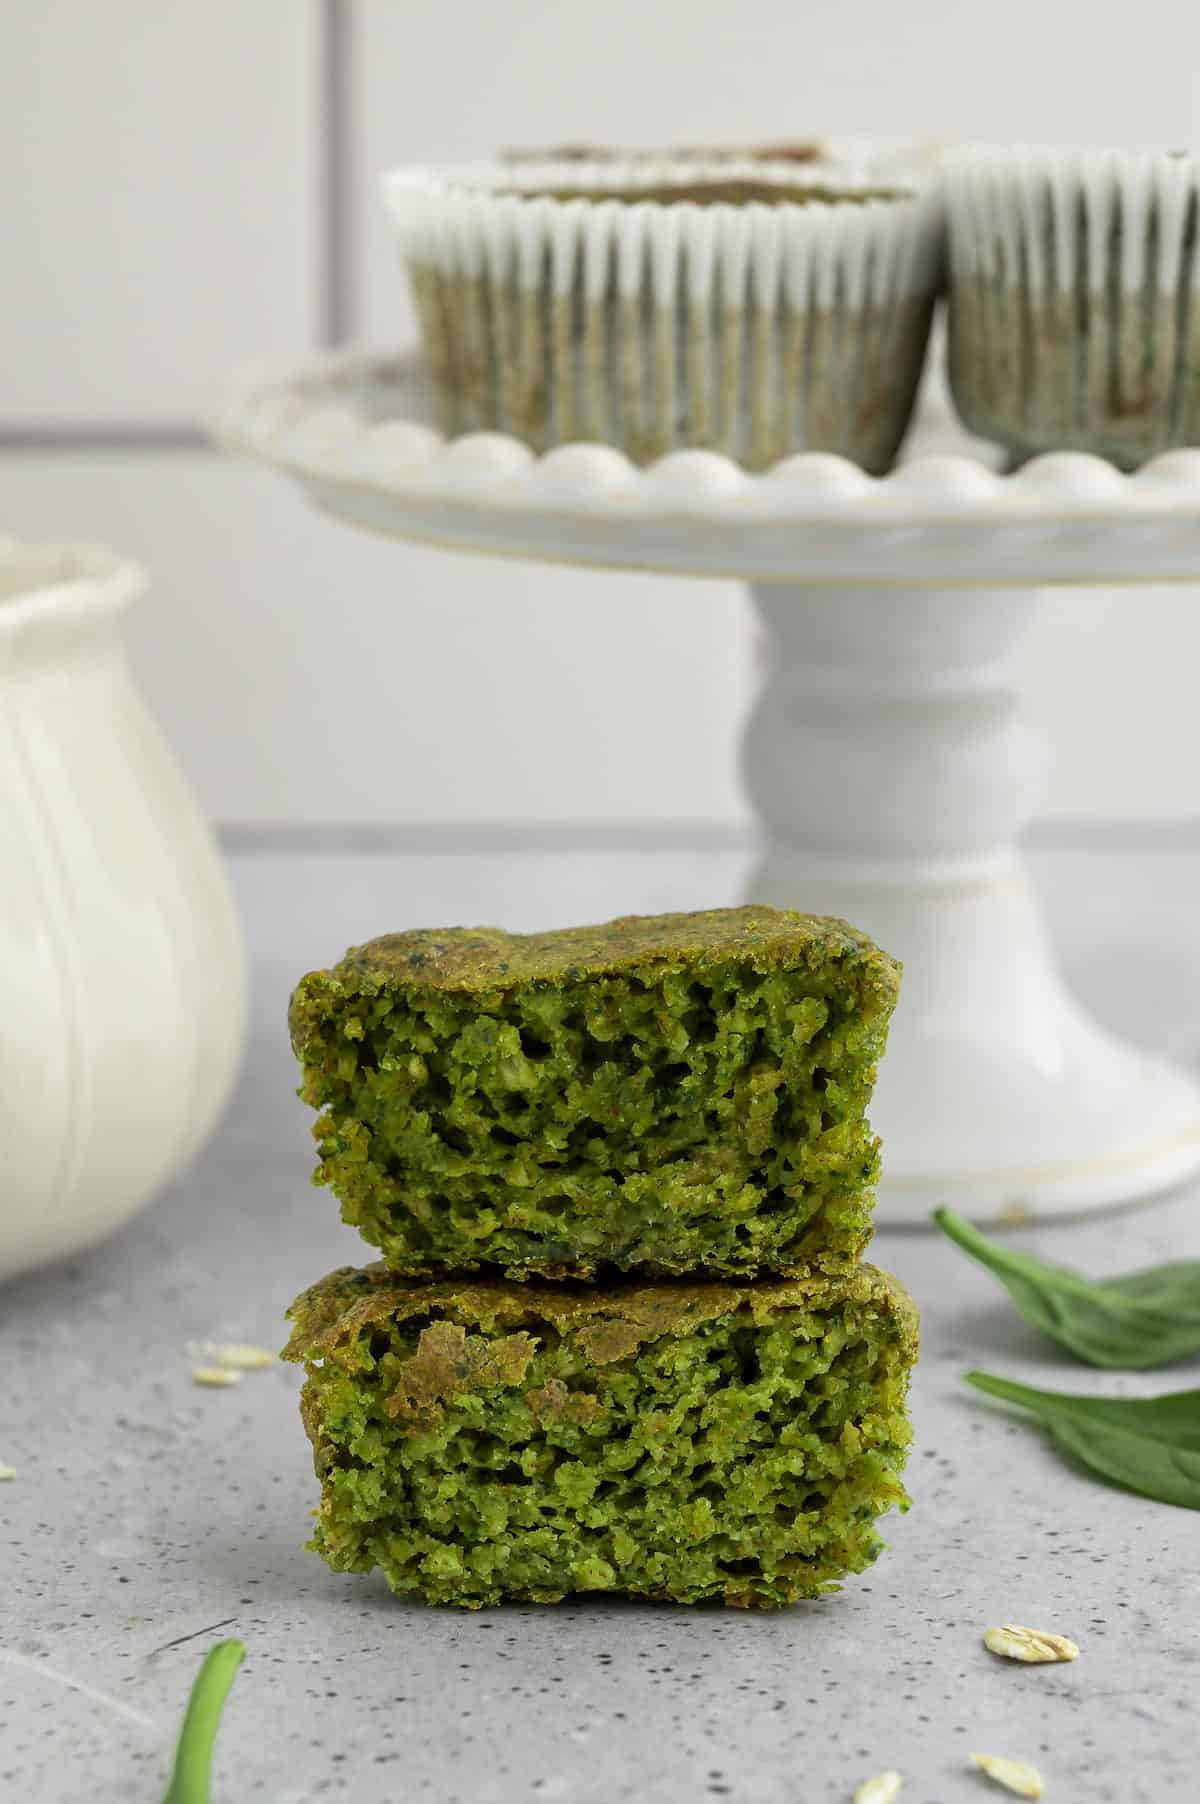 Two spinach banana muffins cut in half and stacked on a countertop.